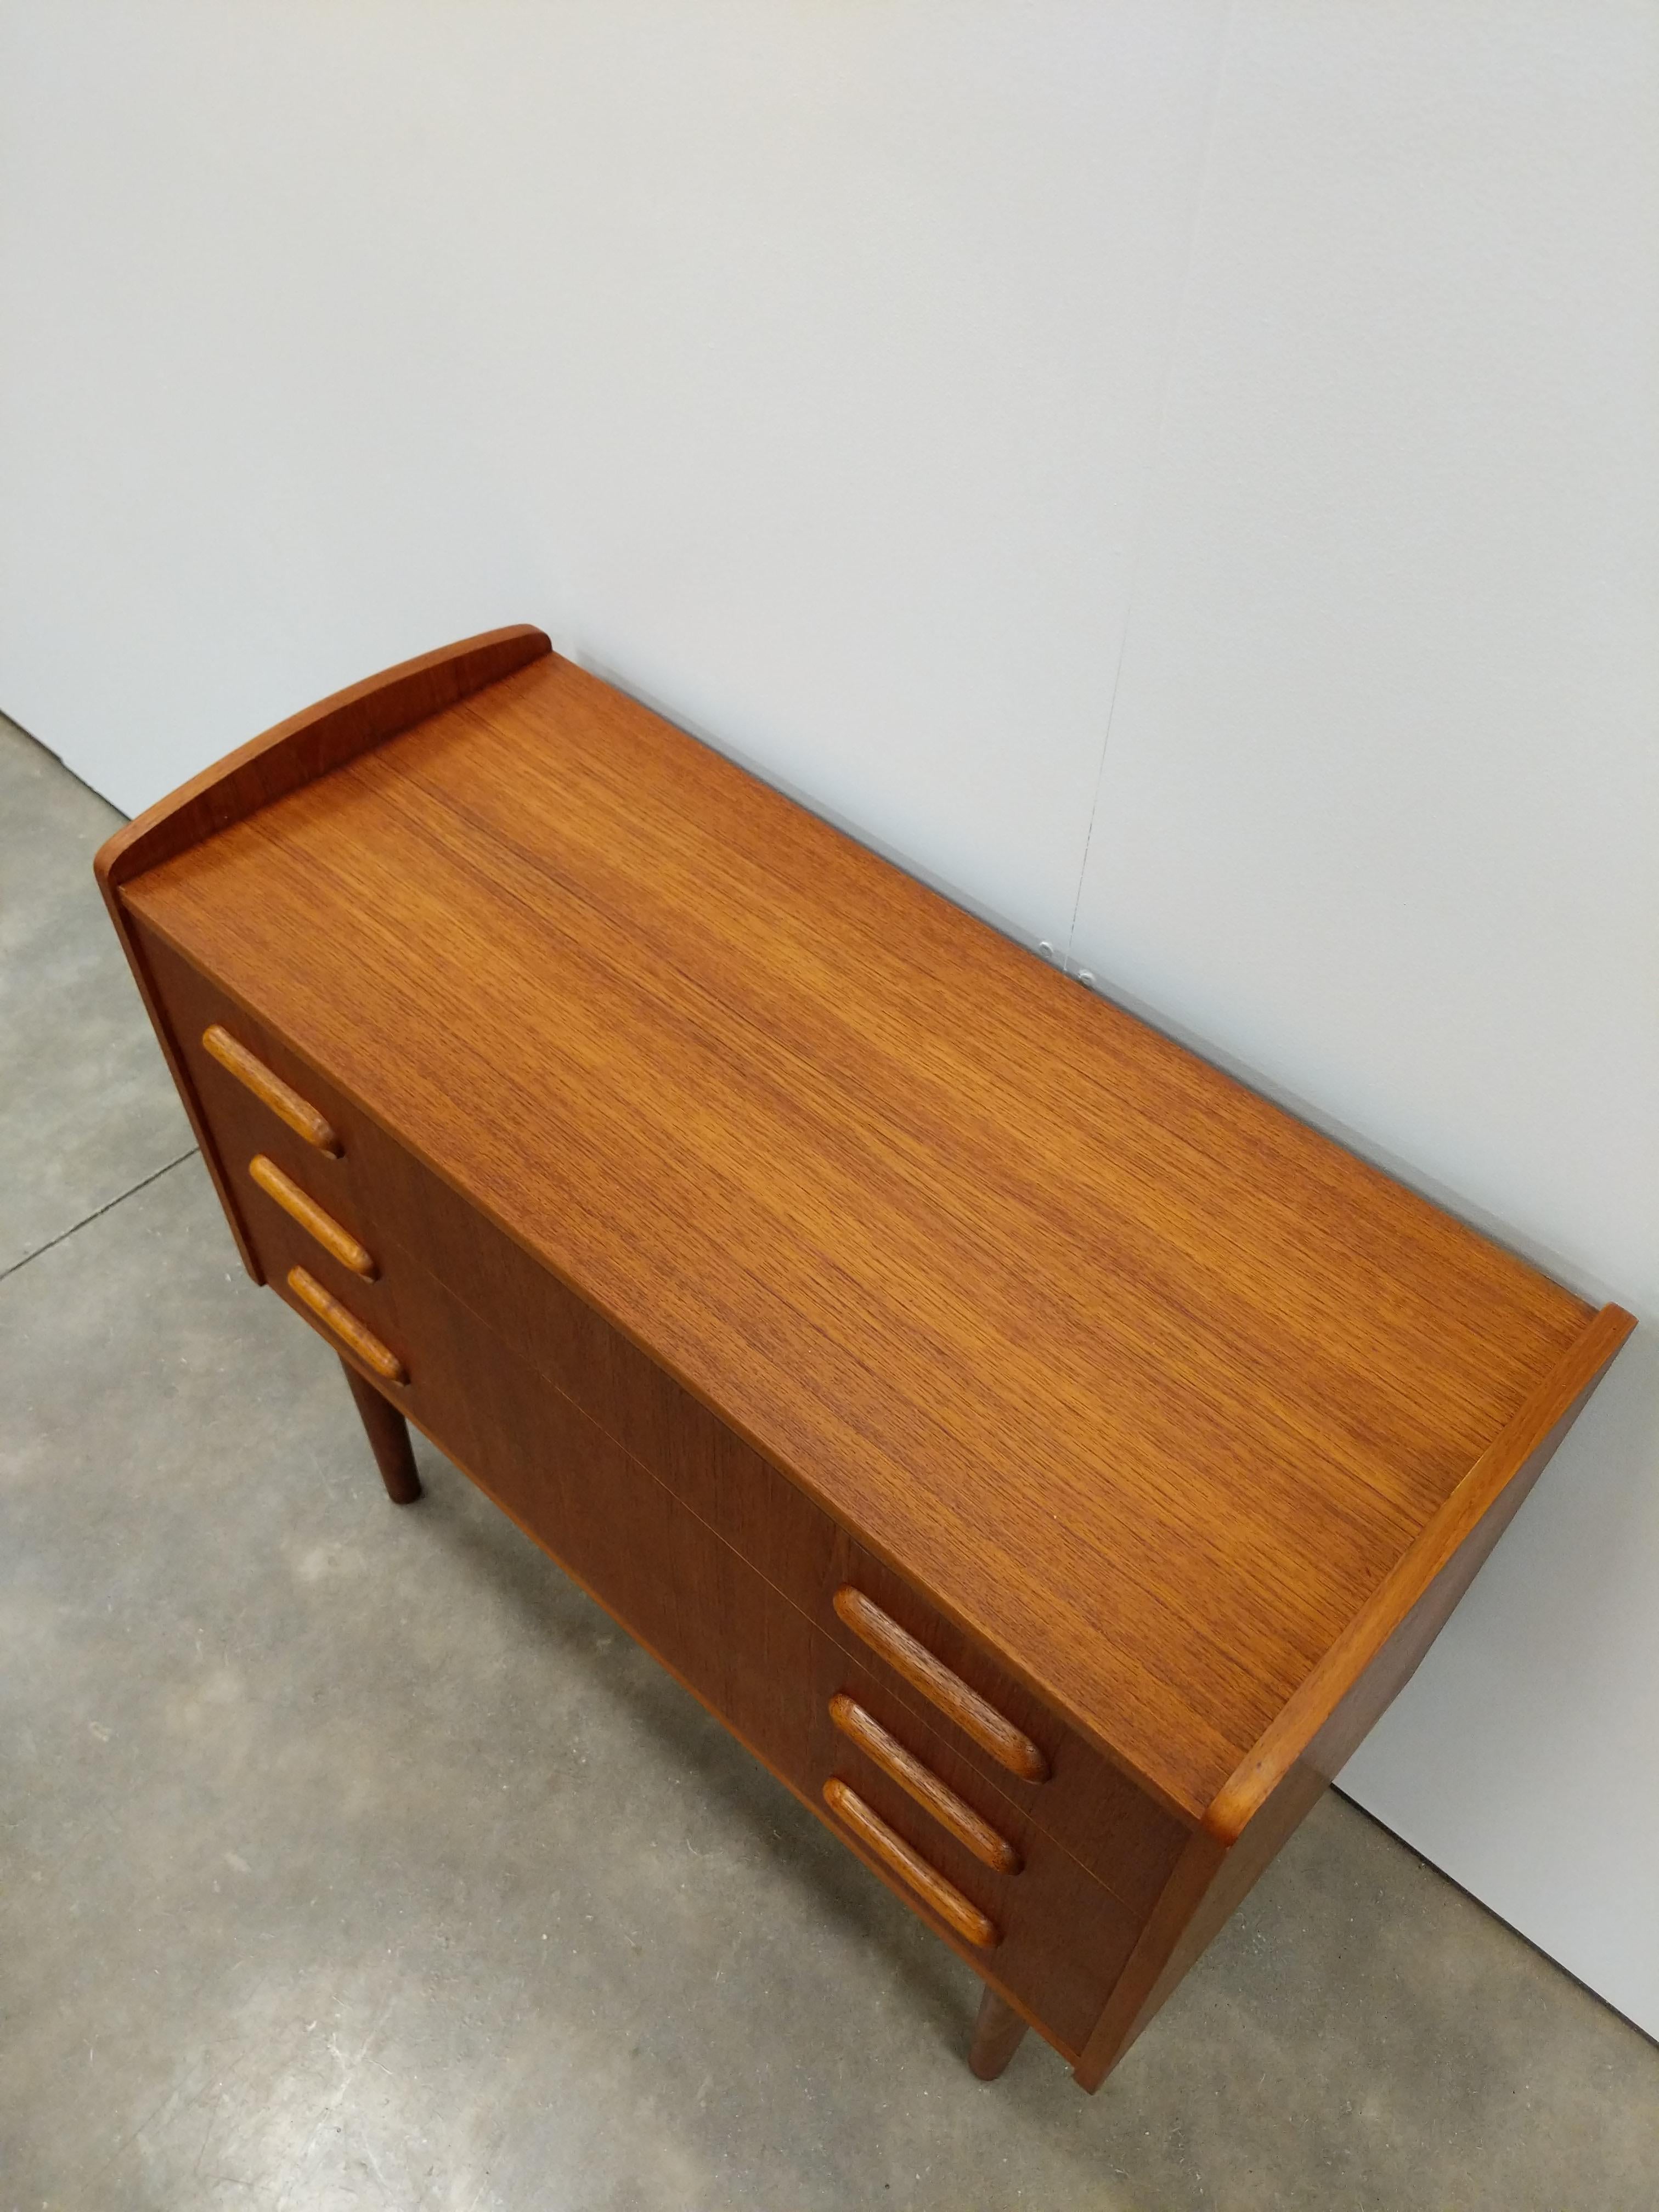 Vintage Danish Mid Century Modern Teak Nightstand / Low Chest In Good Condition For Sale In Gardiner, NY